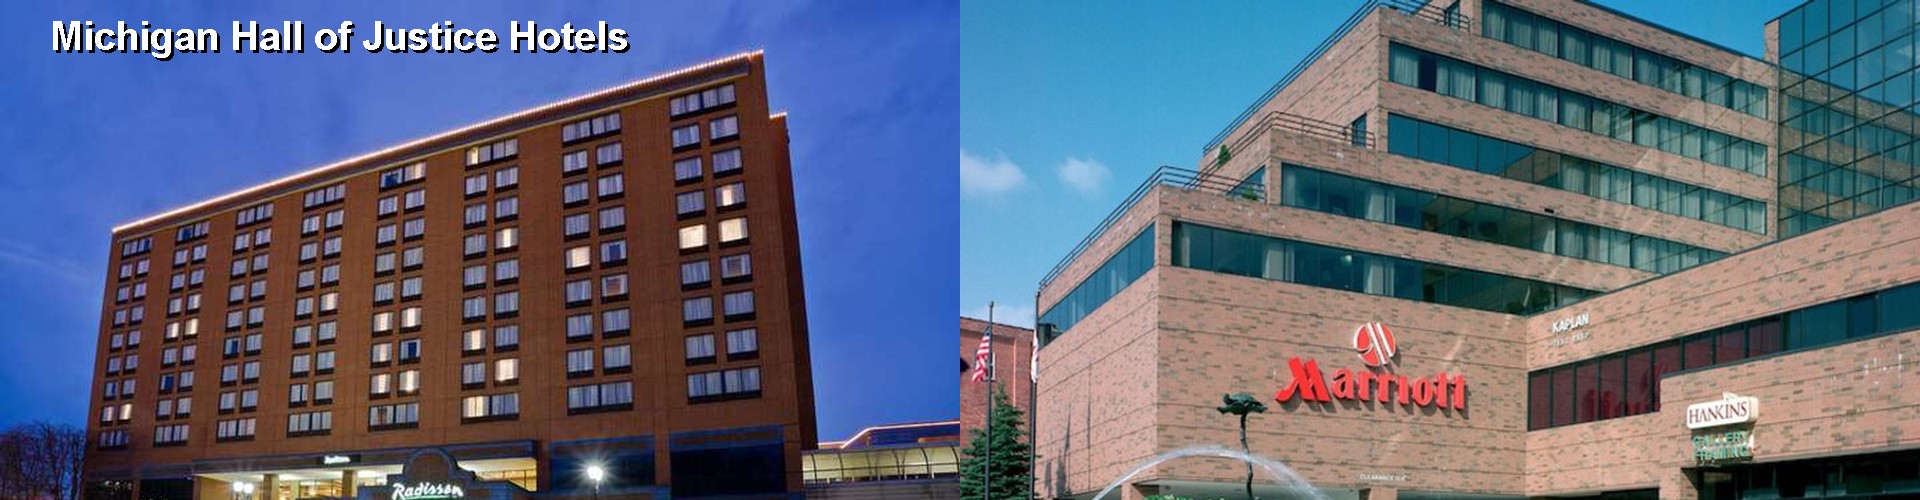 5 Best Hotels near Michigan Hall of Justice